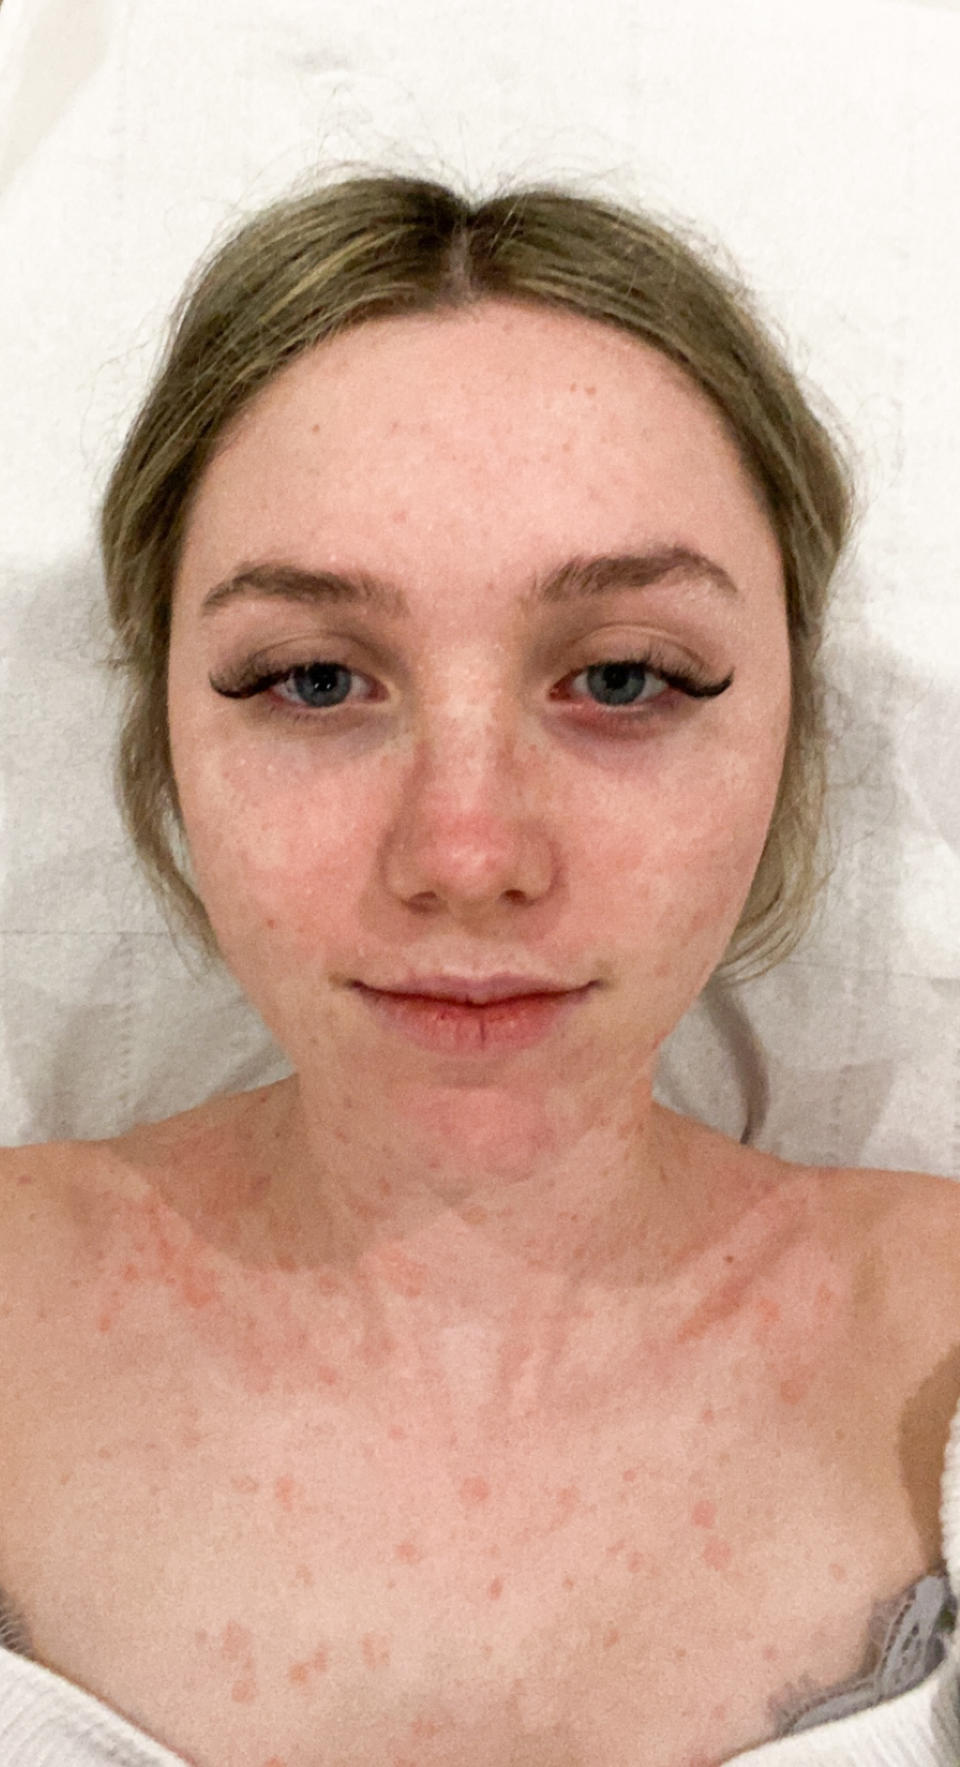 Rosie McKenzie with psoriasis on her face and neck. (Caters)